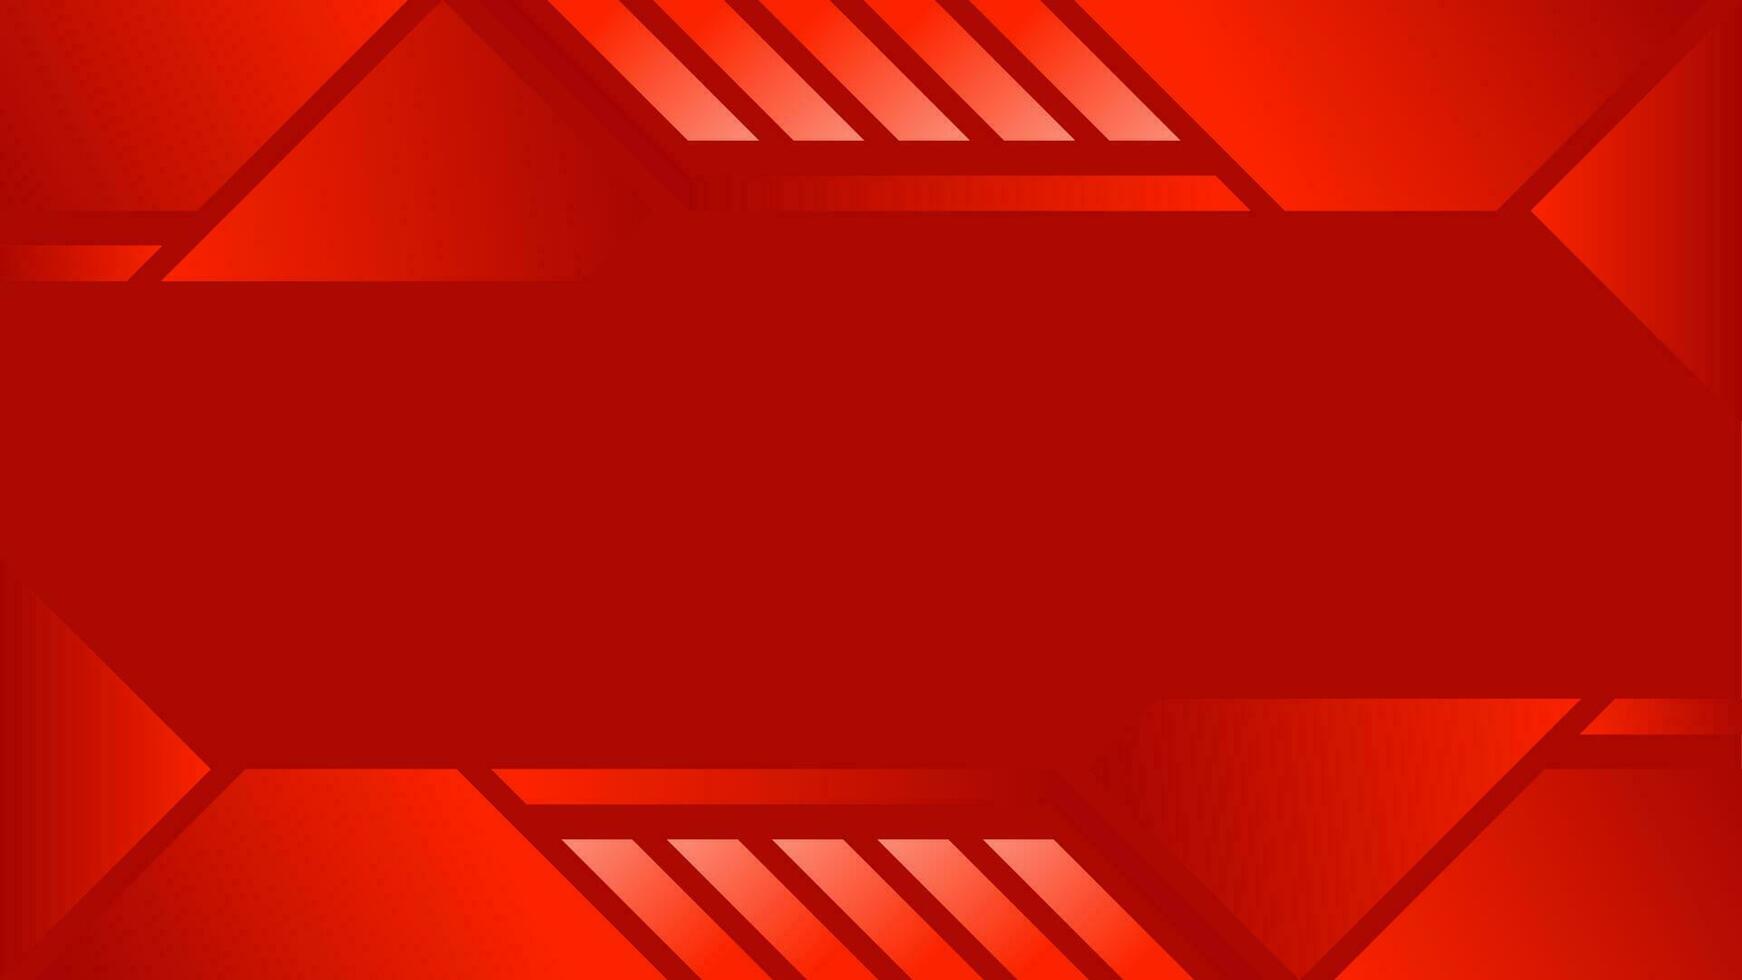 Abstract background vector illustration. Red background vector illustration. Abstract red background for wallpaper, display, landing page, banner, or layout. Simple design graphic for display